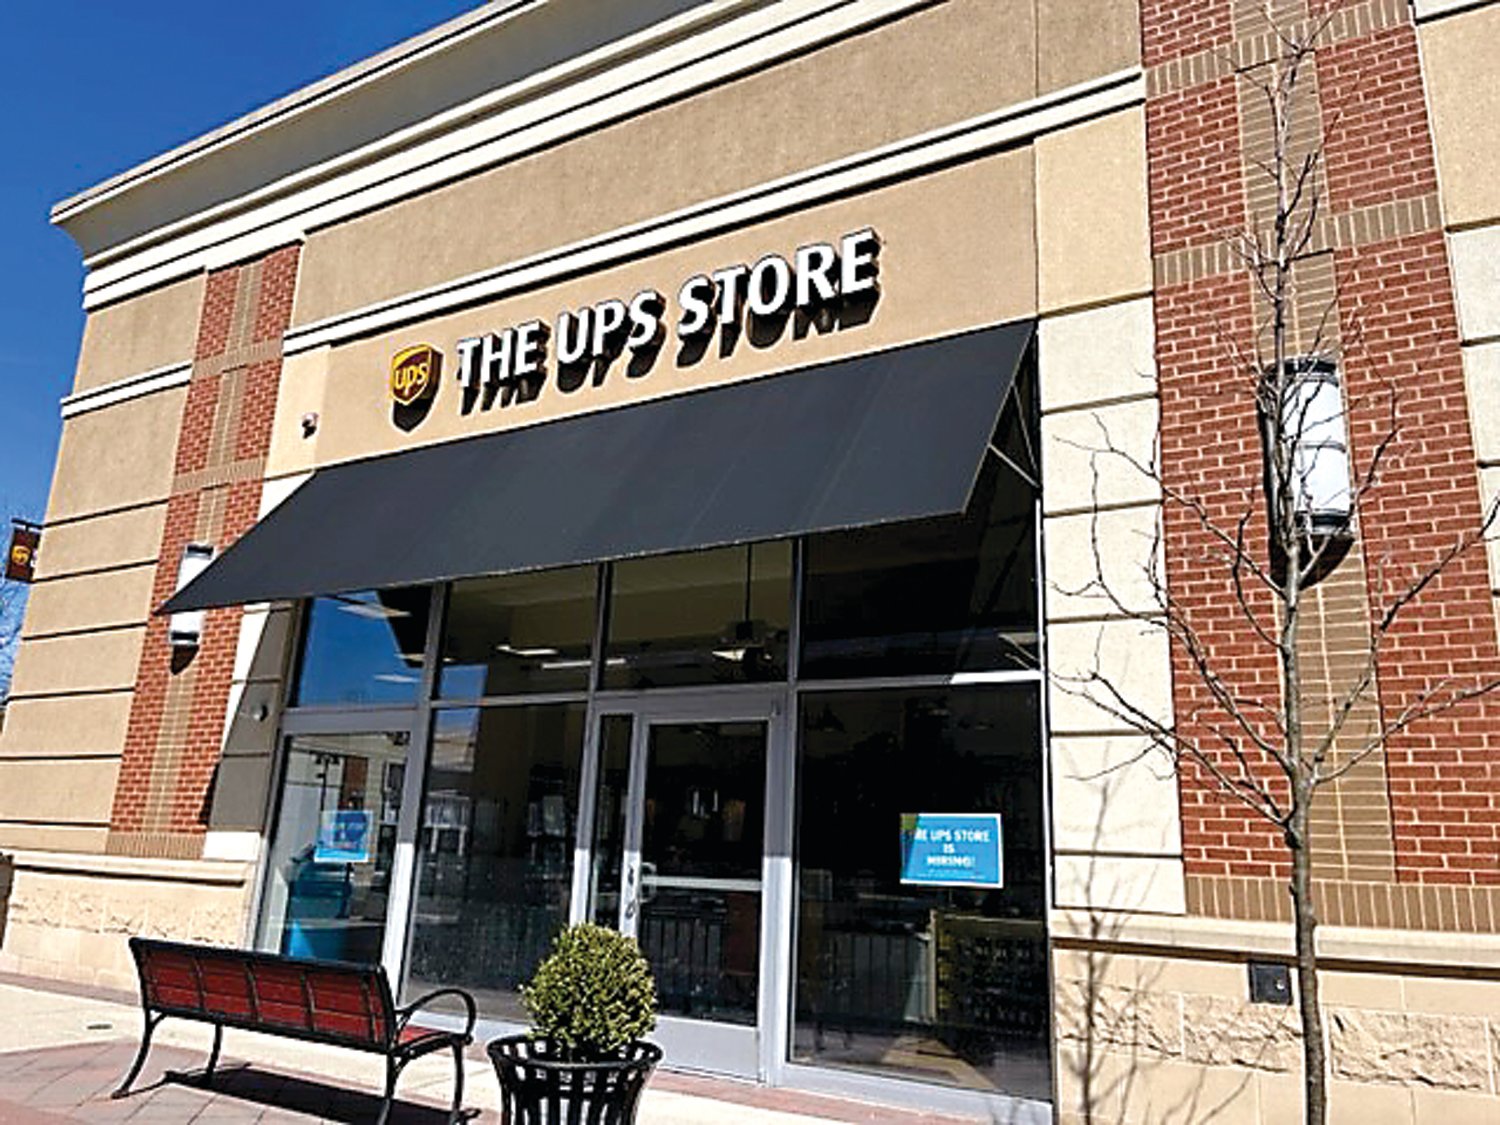 The UPS Store in the Shops at Valley Square, at 1601 Main Street in Warrington, will host its grand opening celebration from 11 a.m. - 4 p.m. April 5.